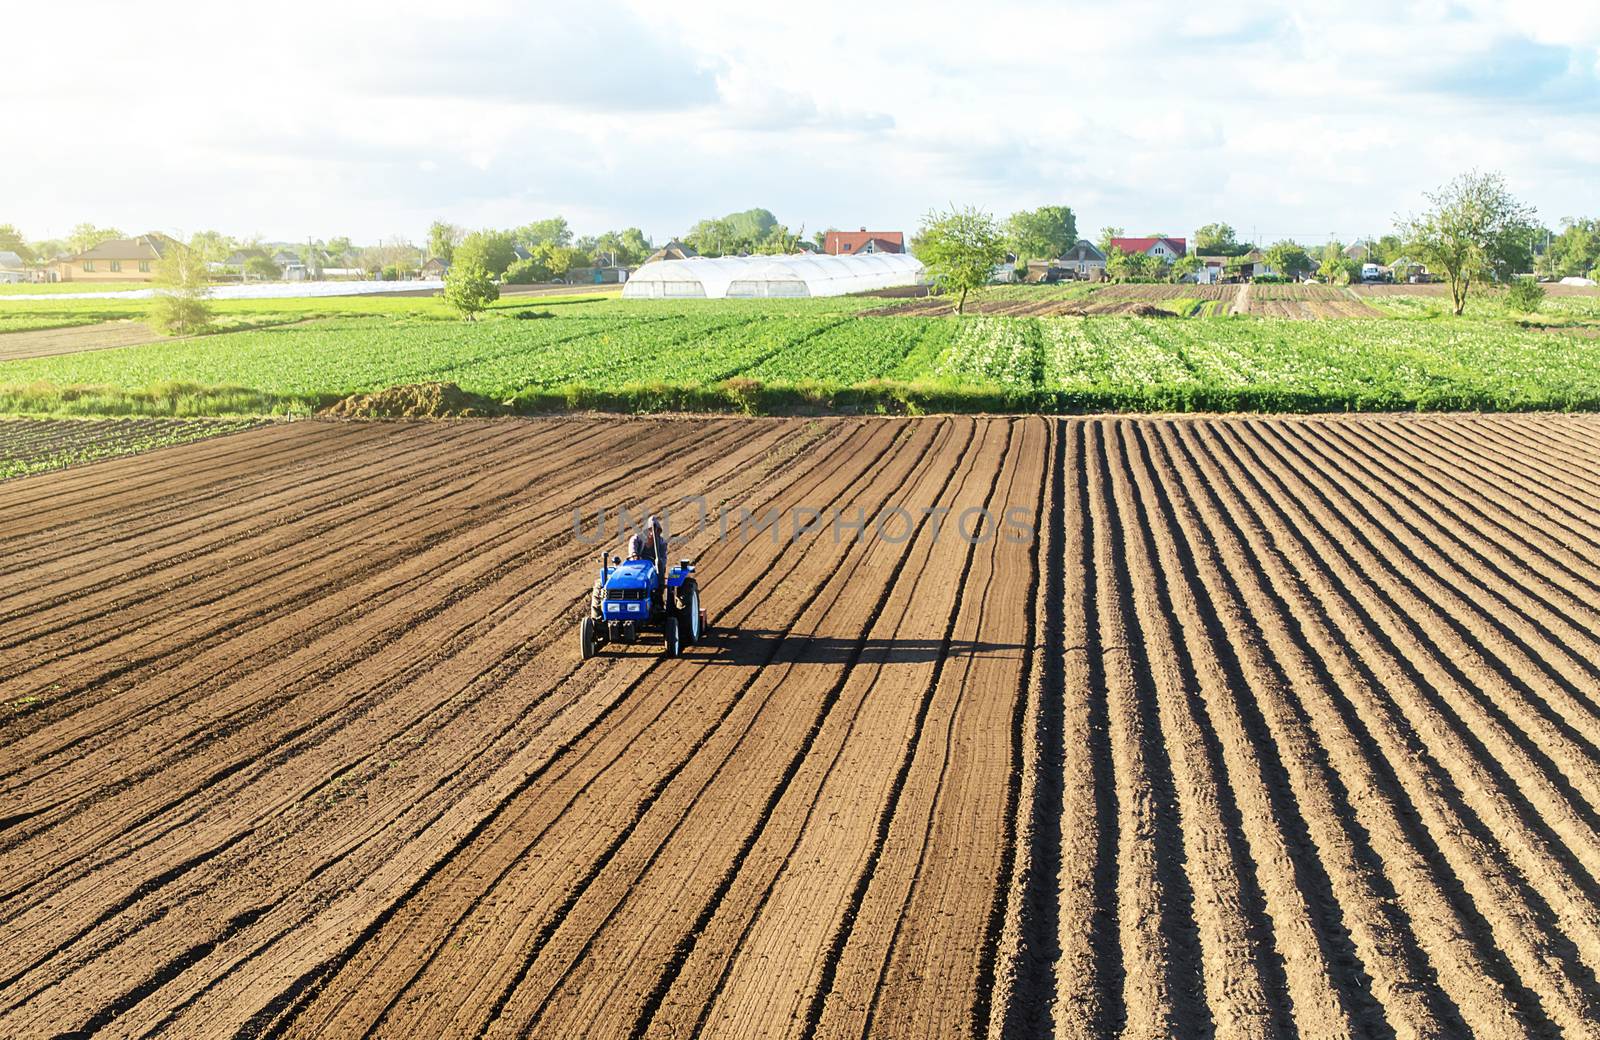 Farmer on a tractor cultivates land after harvesting. Development of agricultural technologies. Cultivating soil for further planting. Loosening, improving soil quality. Food production vegetable